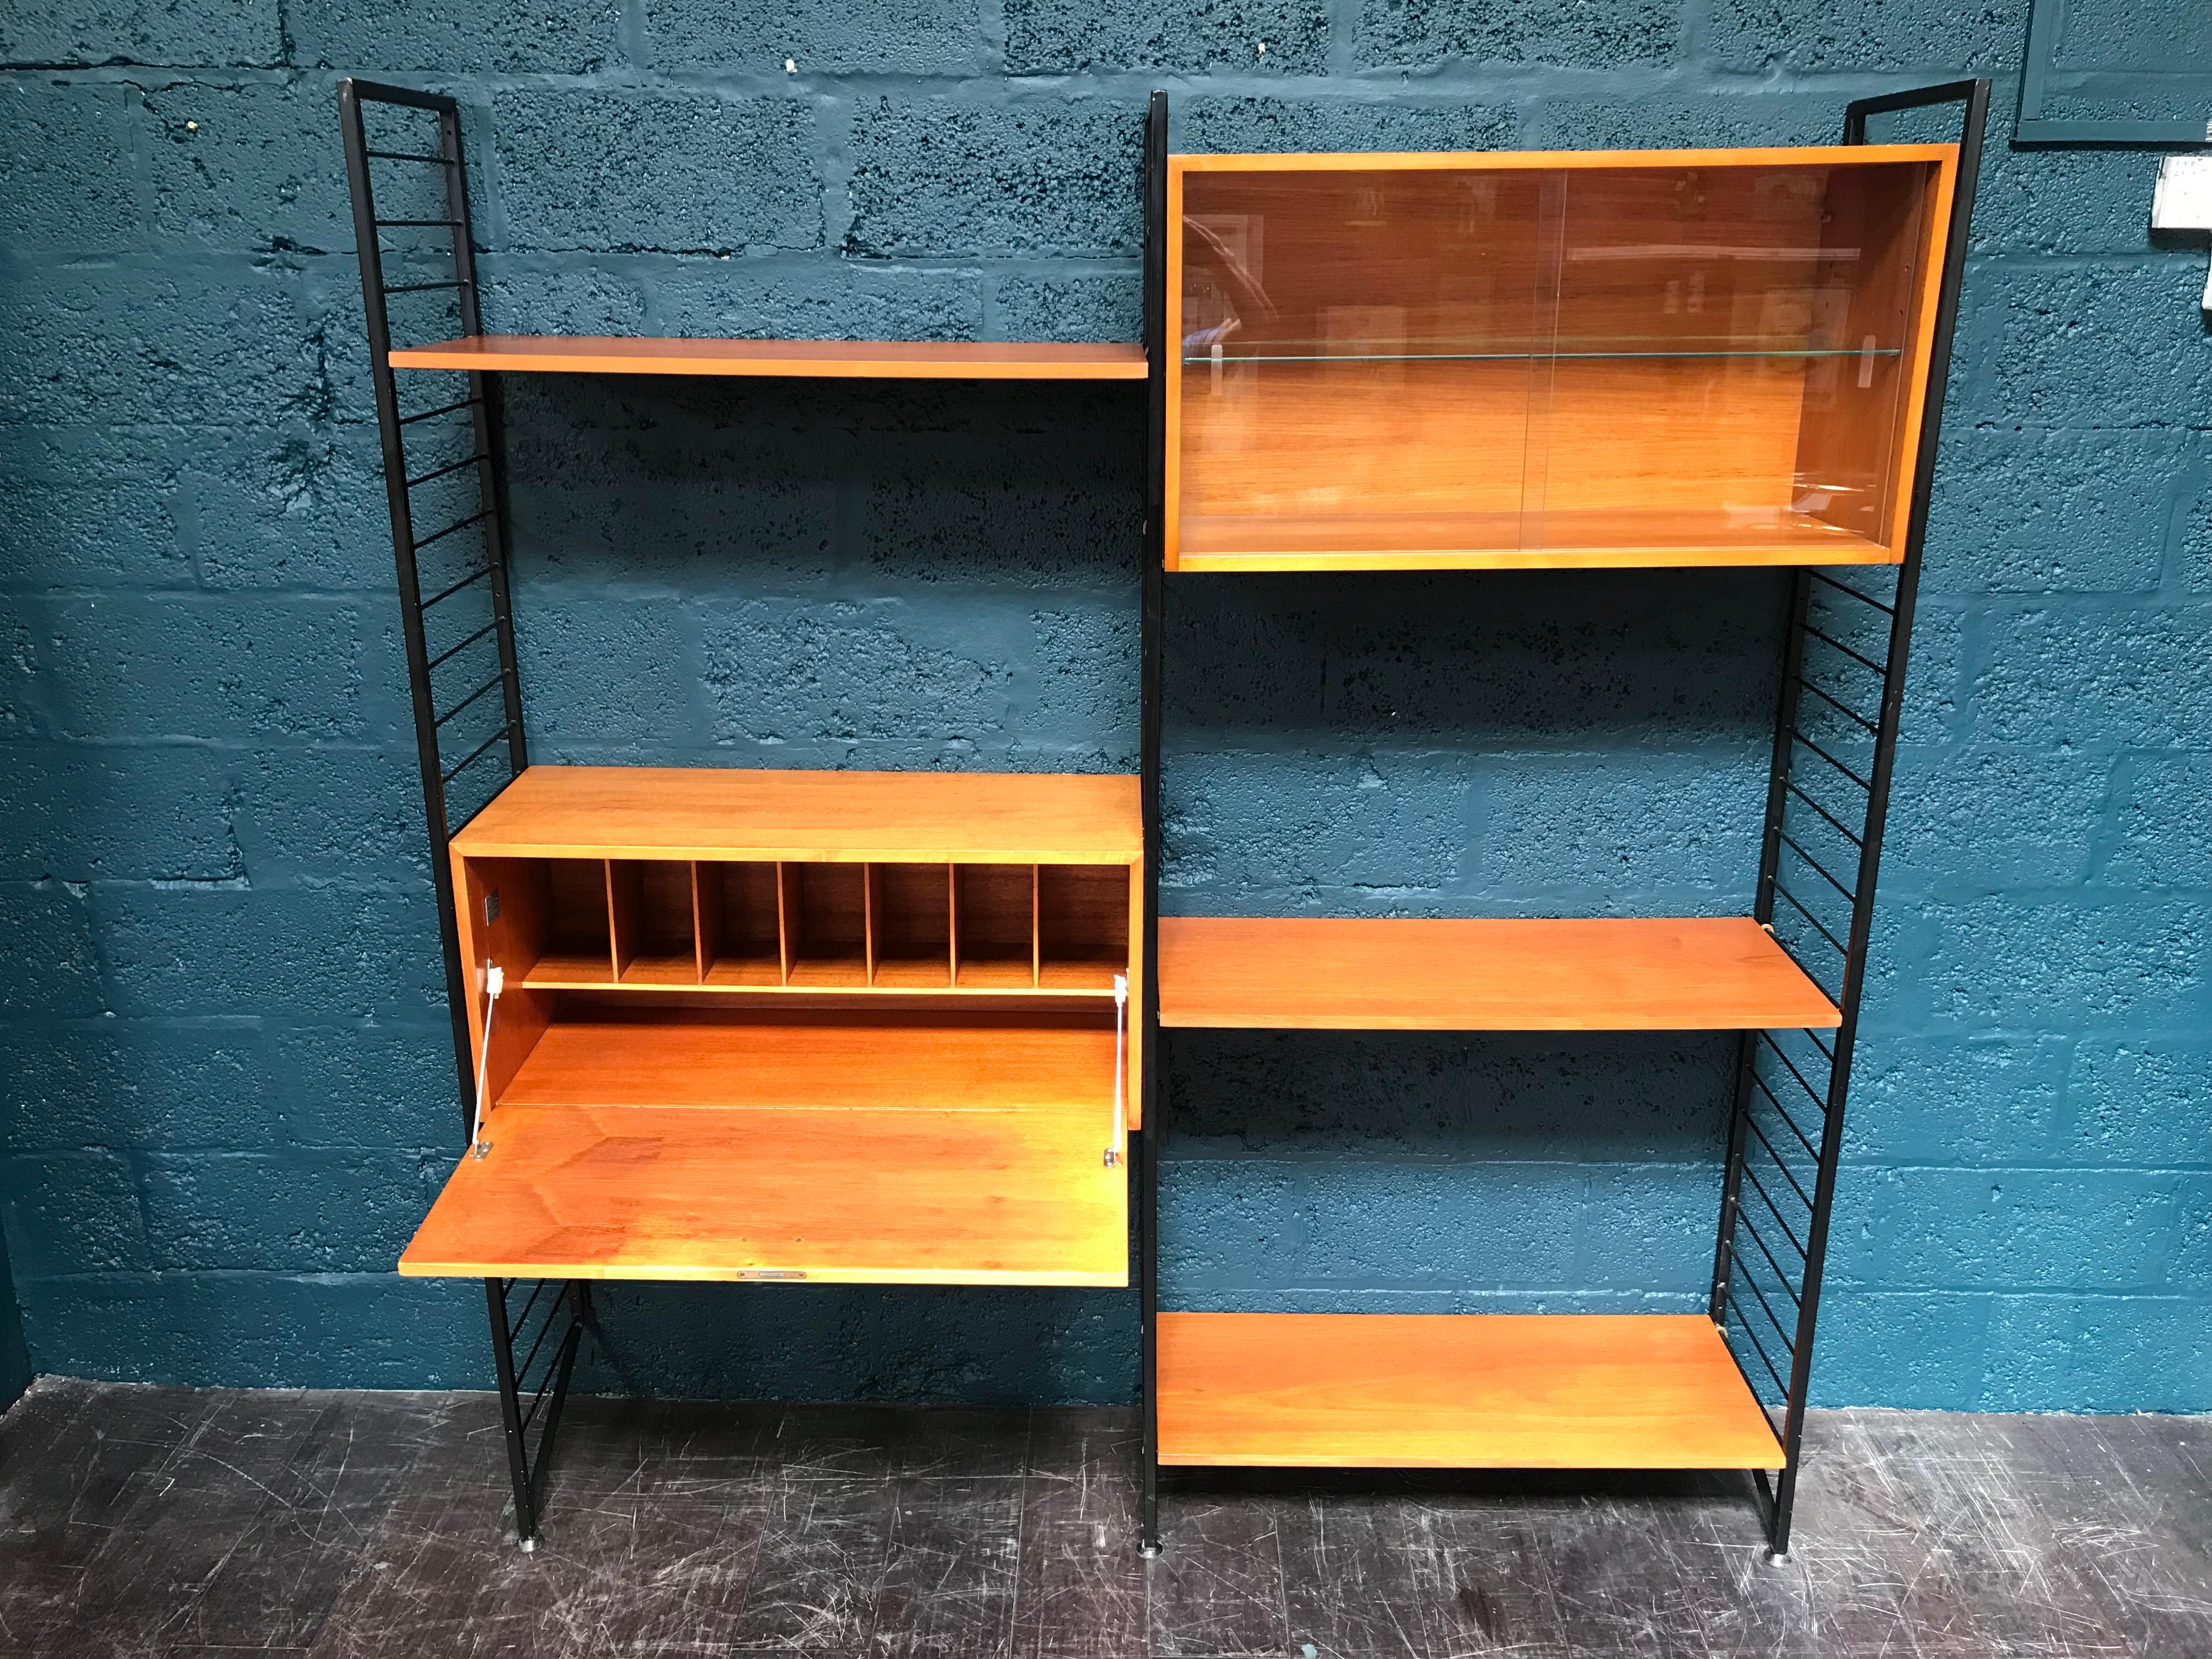 2 Bay Ladderax Teak Midcentury Shelving System with Bureau by Robert Heal For Sale 1